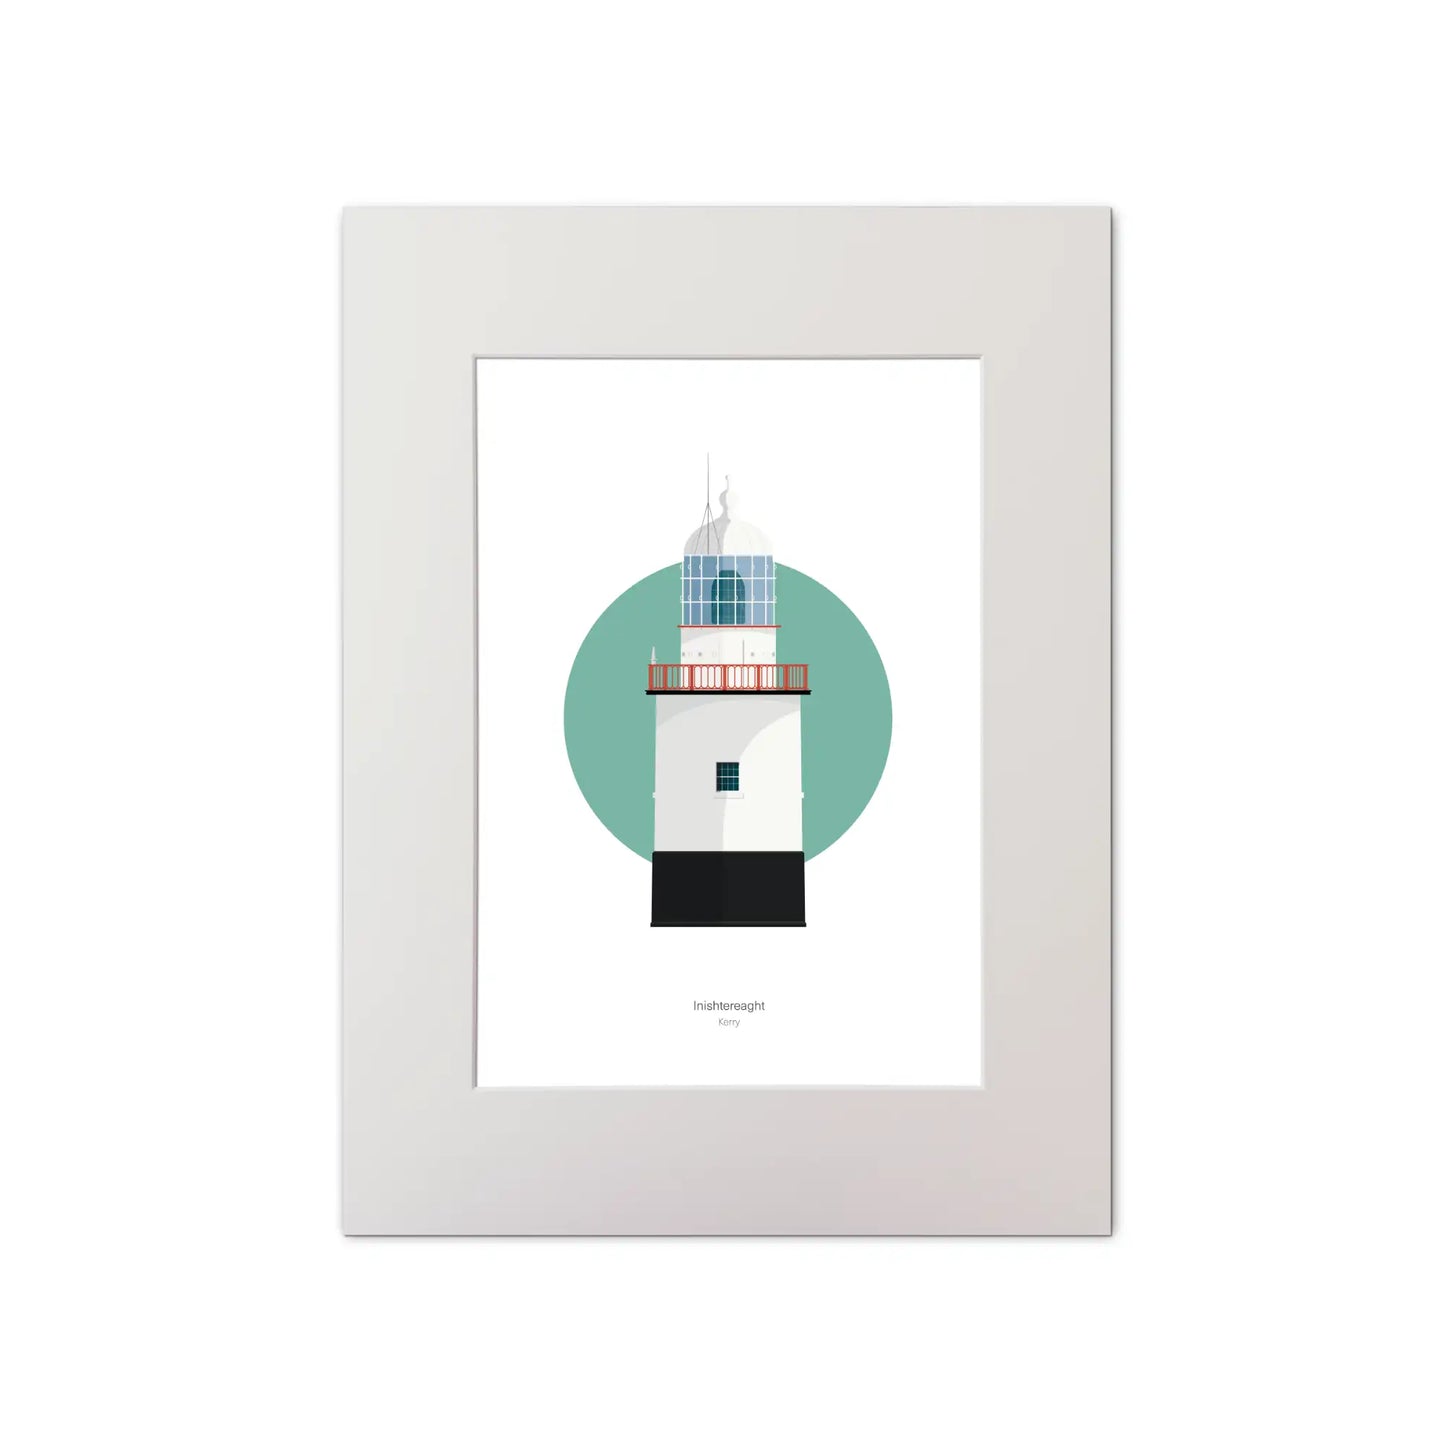 Illustration of Inistearaght lighthouse on a white background inside light blue square, mounted and measuring 30x40cm.